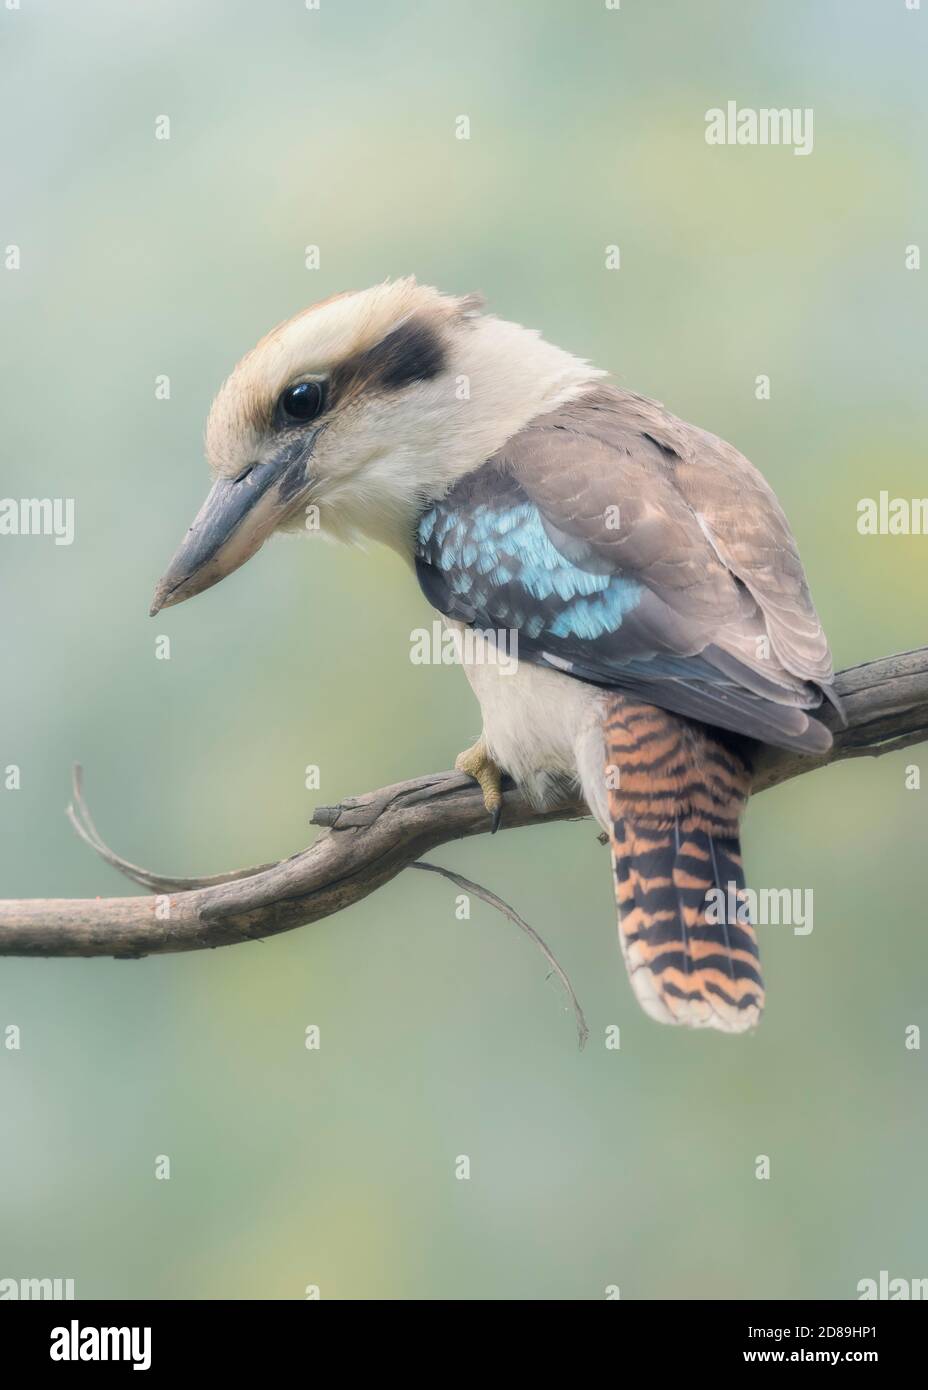 Close-up of a laughing kookaburra bird perched on a branch, Australia Stock Photo